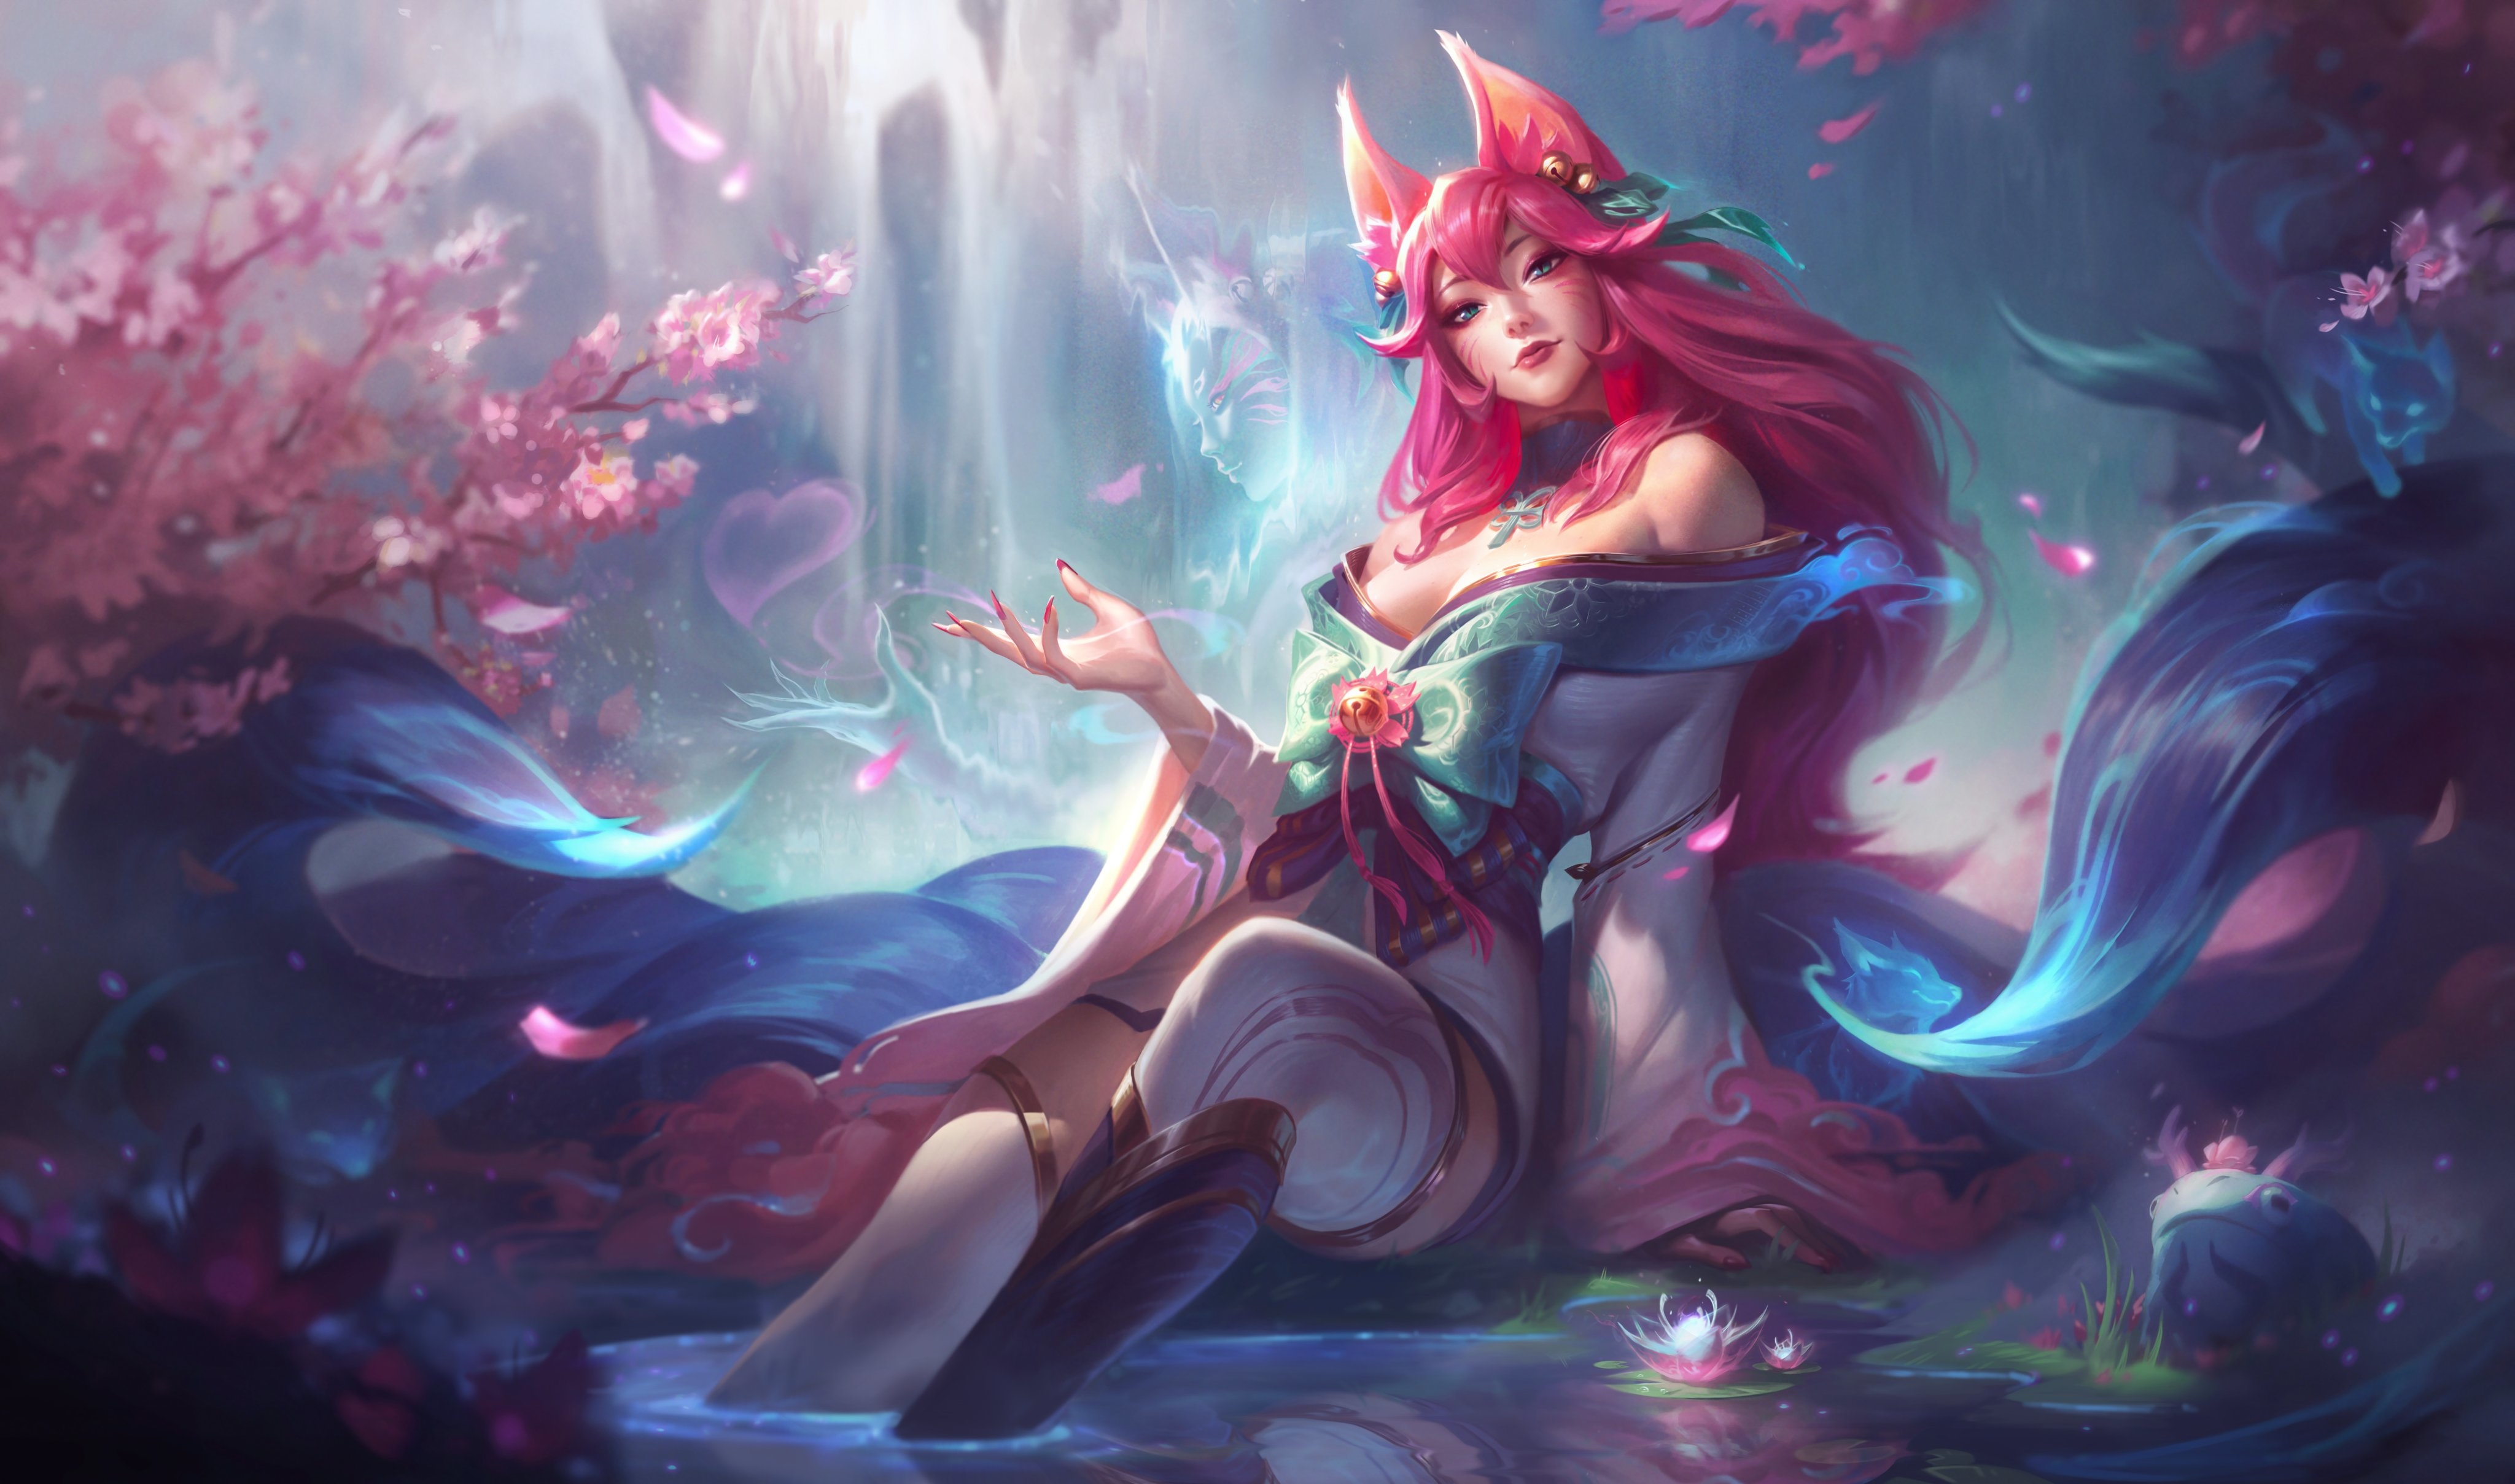 48x1152 Ahri 4k League Of Legends Art 48x1152 Resolution Wallpaper Hd Games 4k Wallpapers Images Photos And Background